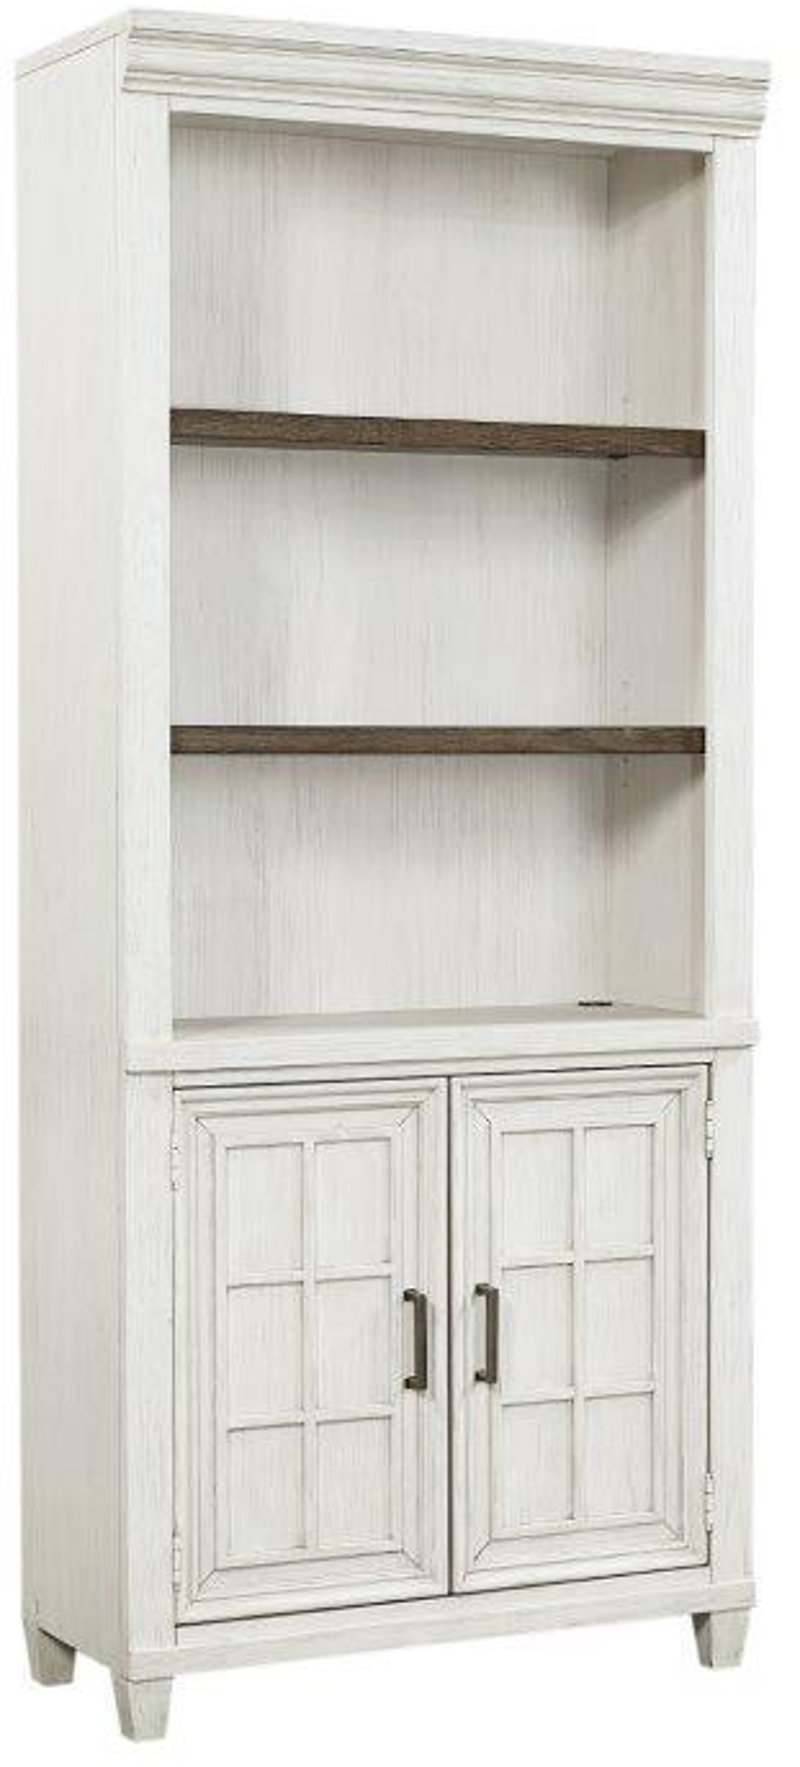 Caraway Antique White Bookcase With, Tall Book Shelves With Doors